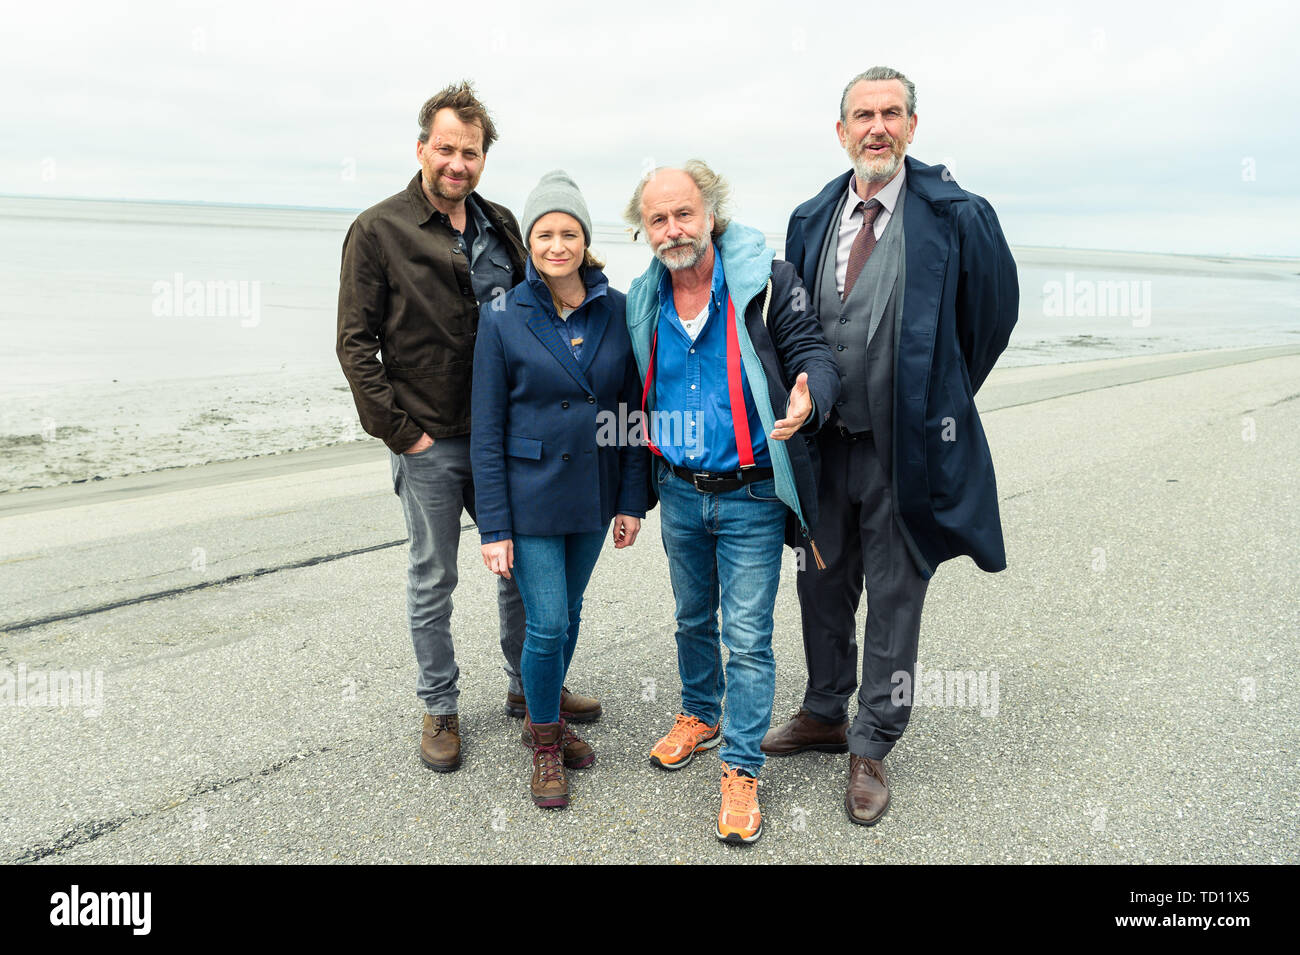 Norddeich, Germany. 11th June, 2019. Christian Erdmann (as Frank Eller), Julia Jentsch (as Ann Kathrin Klaasen), Klaus-Peter Wolf (book author), and Kai Maertens (Ubbo Heide) stand on the dike during the press date for the Saturday thriller 'Ostfriesengrab'. The fourth film in the Ostfriesland crime series is based on the novel of the same name by Klaus-Peter Wolf (about dpa 'successful author Klaus-Peter Wolf provides material for new ZDF crime thriller'). Credit: Mohssen Assanimoghaddam/dpa/Alamy Live News Stock Photo